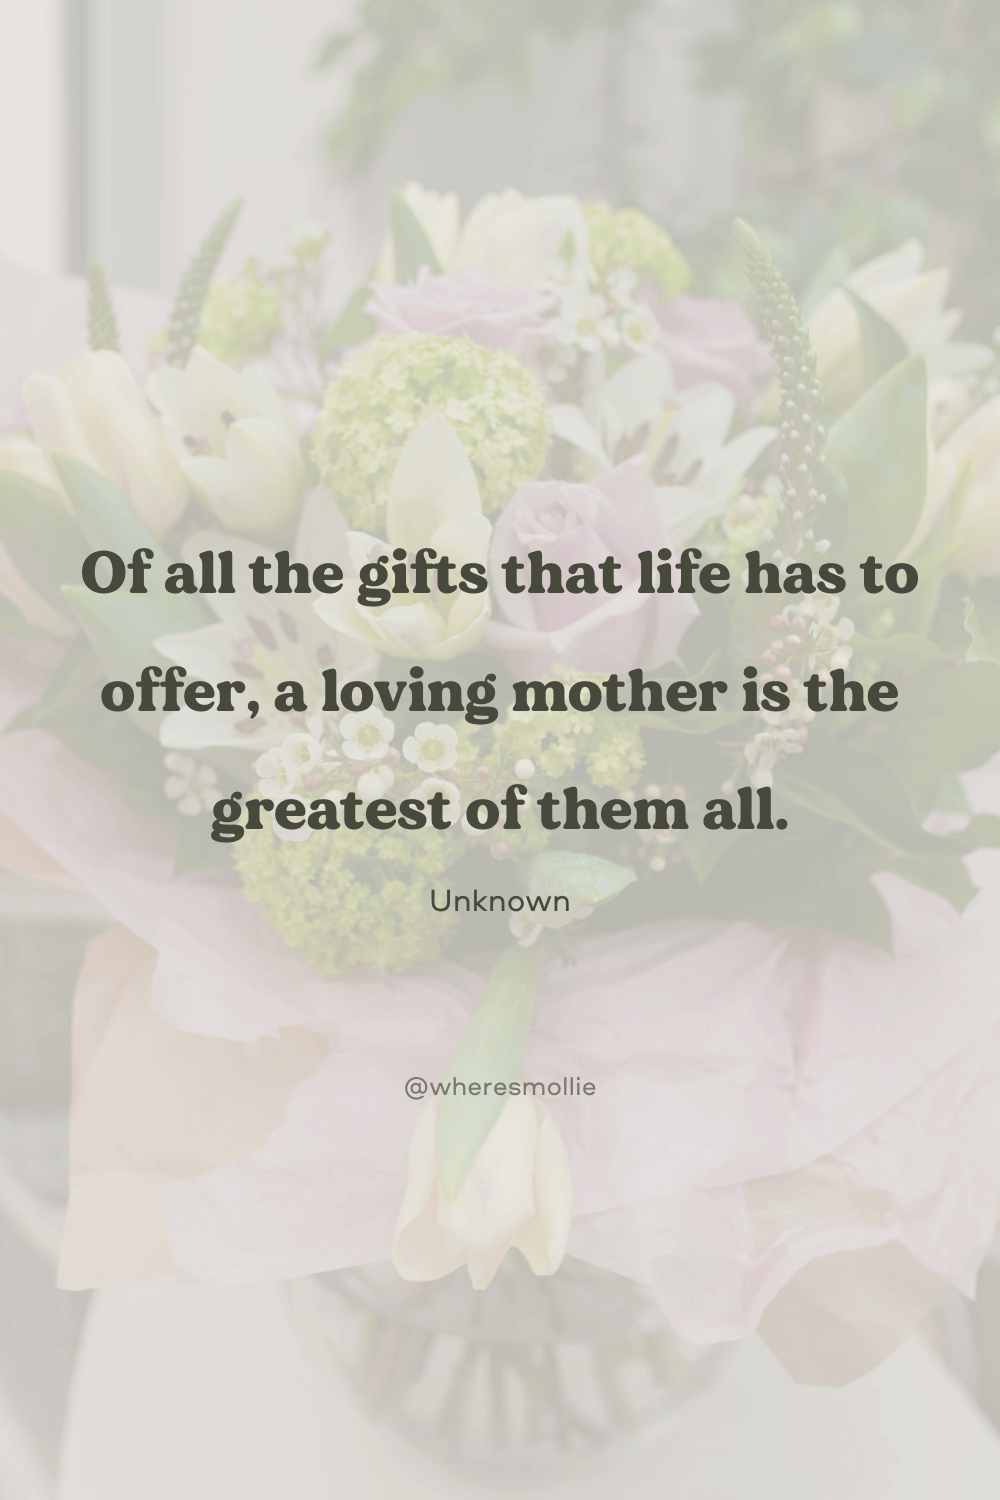 Mother's Day 2021 quotes